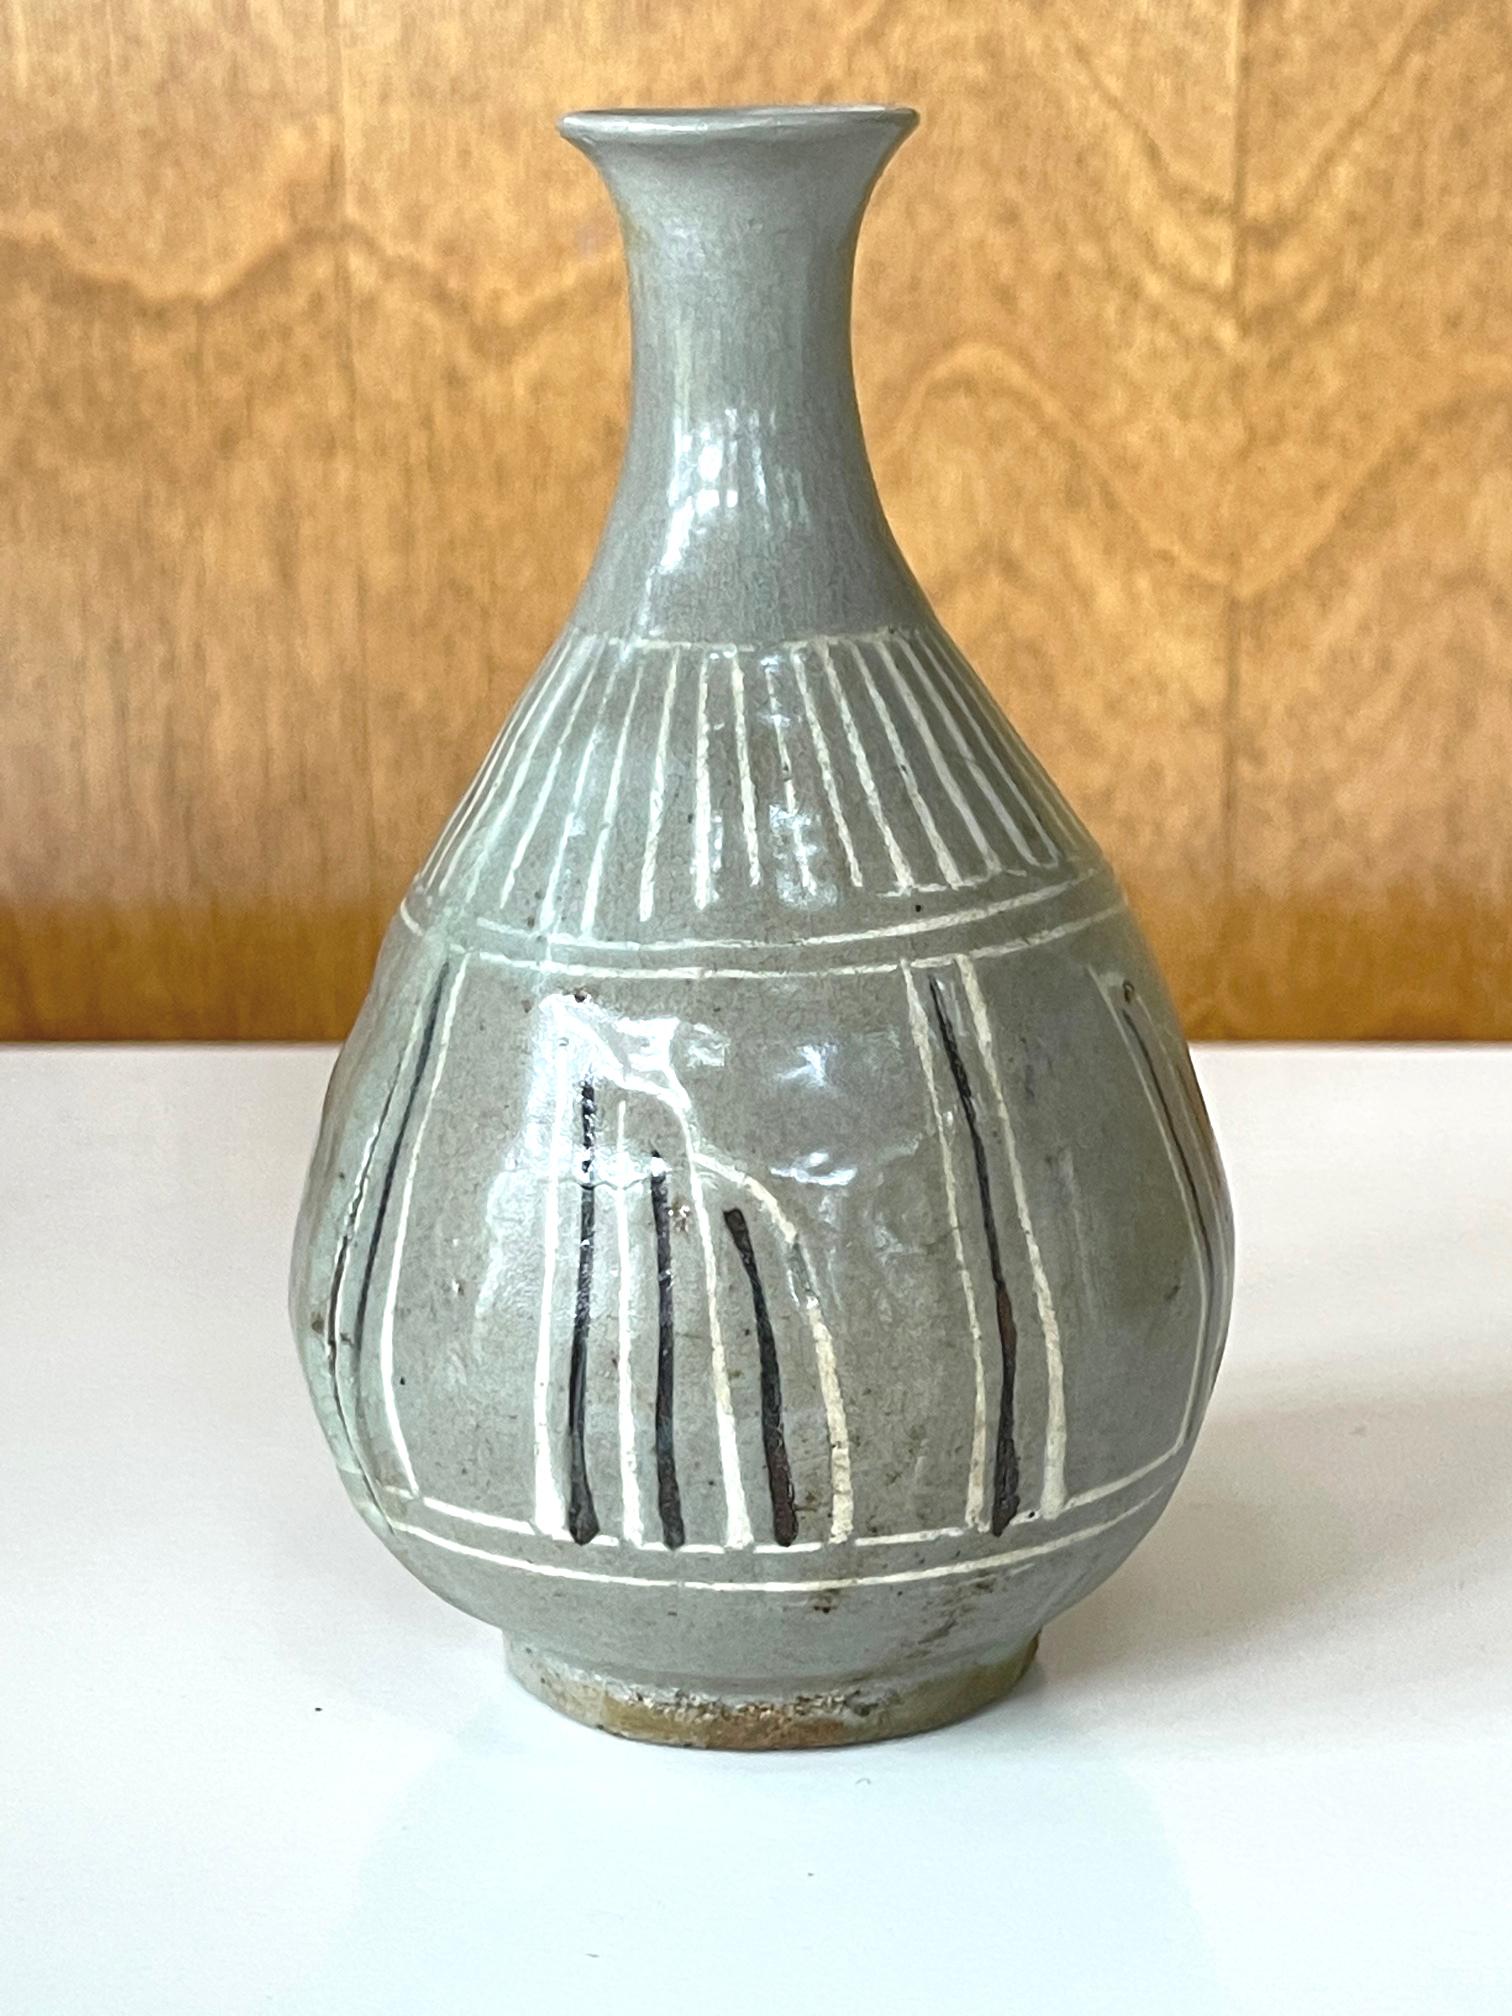 On offer is an antique Korean ceramic vase from the end of Goryeo to the beginning of Joseon period (circa 14-15th). The vase features celadon crackled glaze with underglaze inlay design in black and white. The vase was a transitional piece made